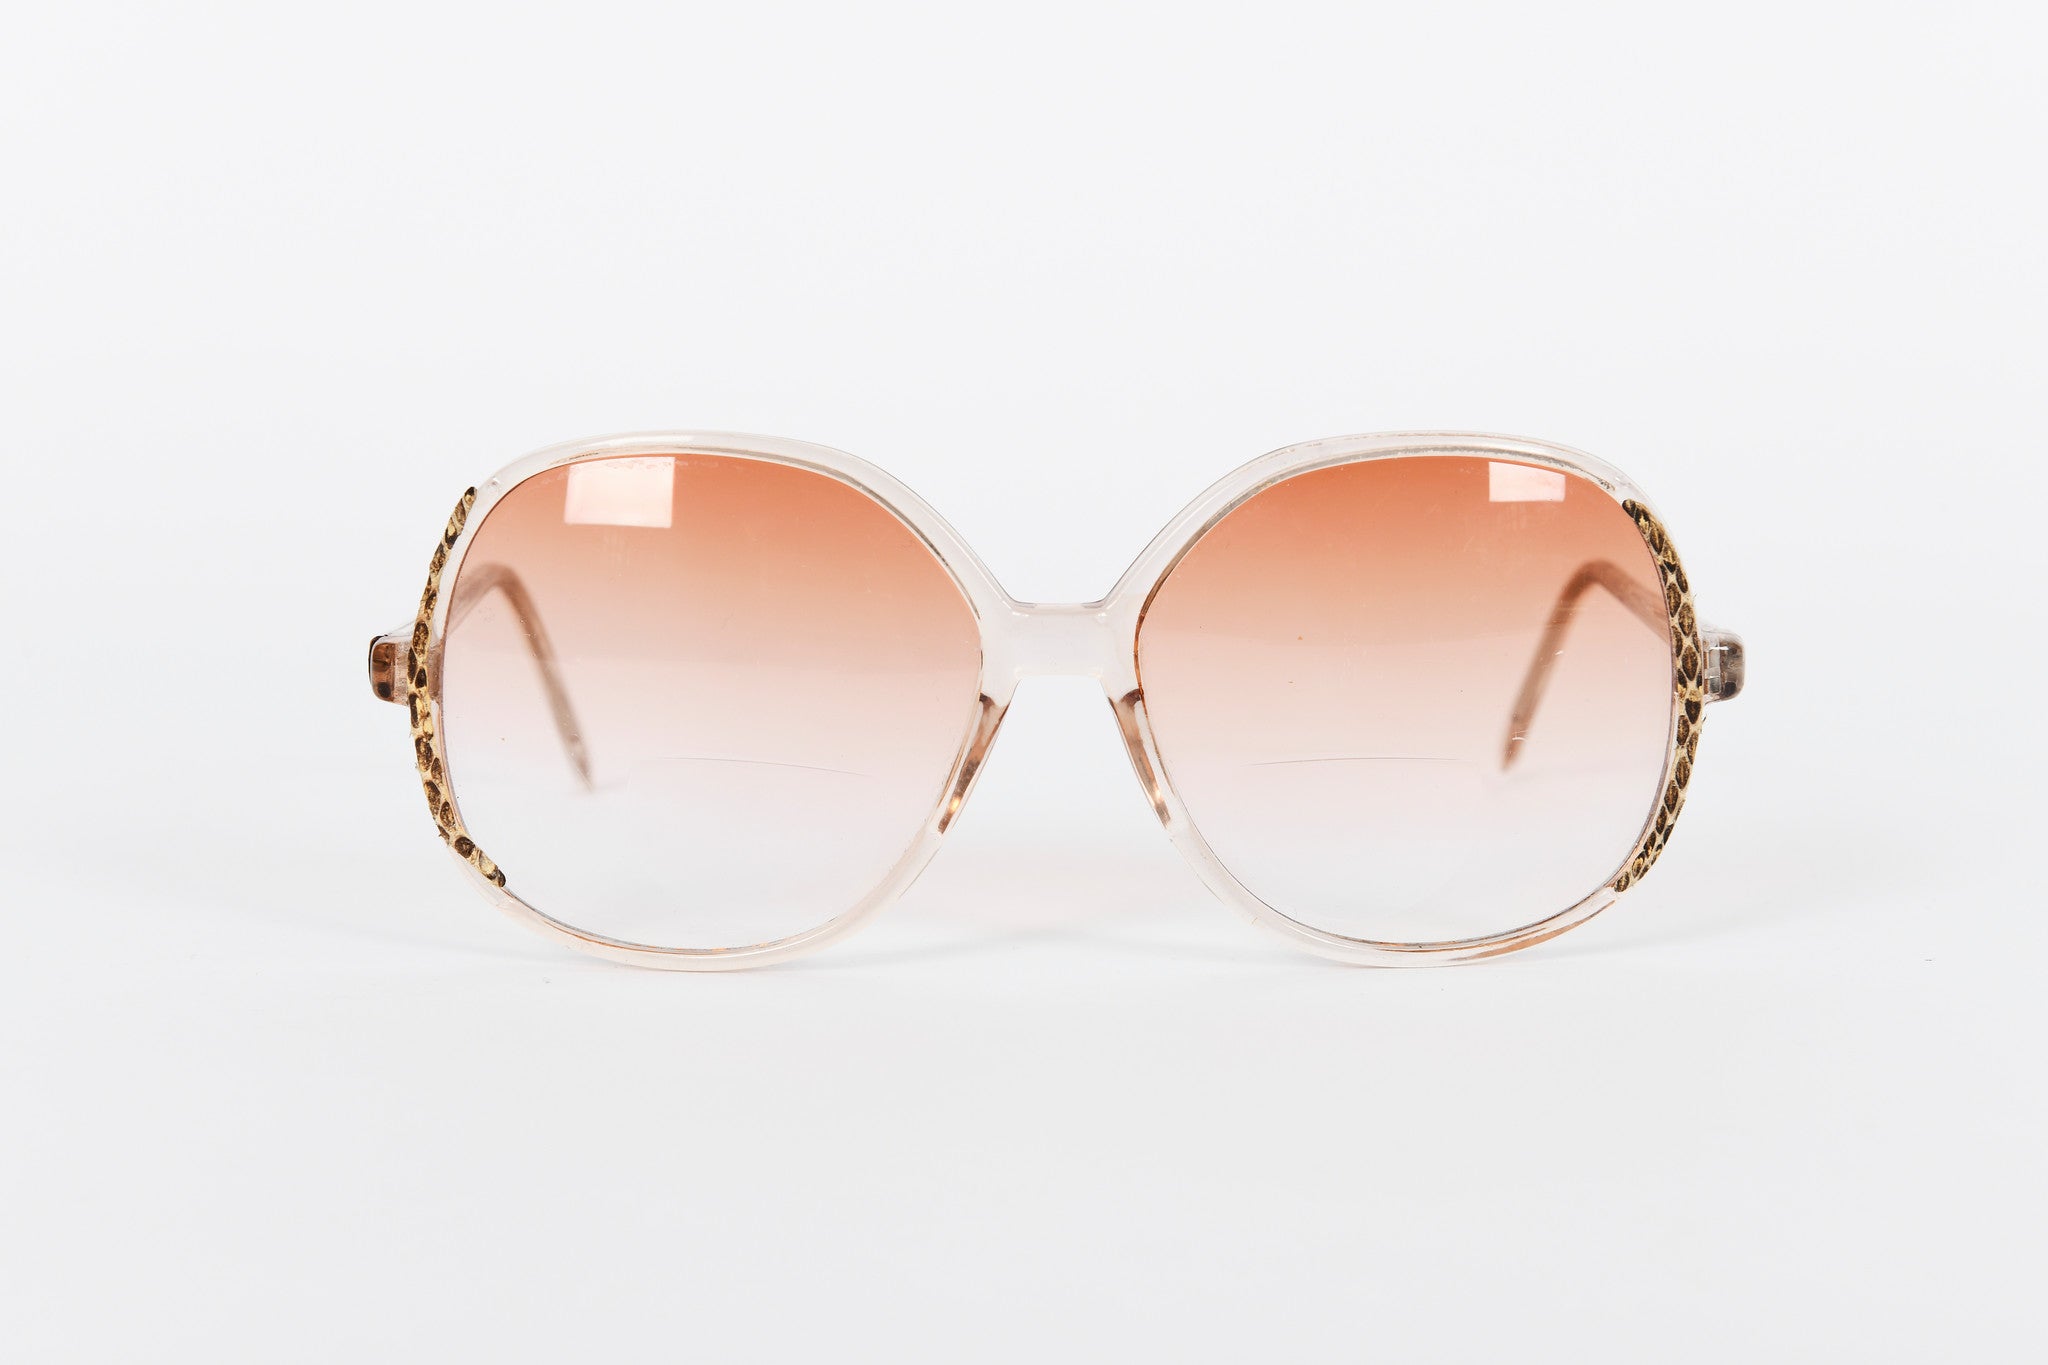 Retro 1980s clear acetate frames with snakeskin detail